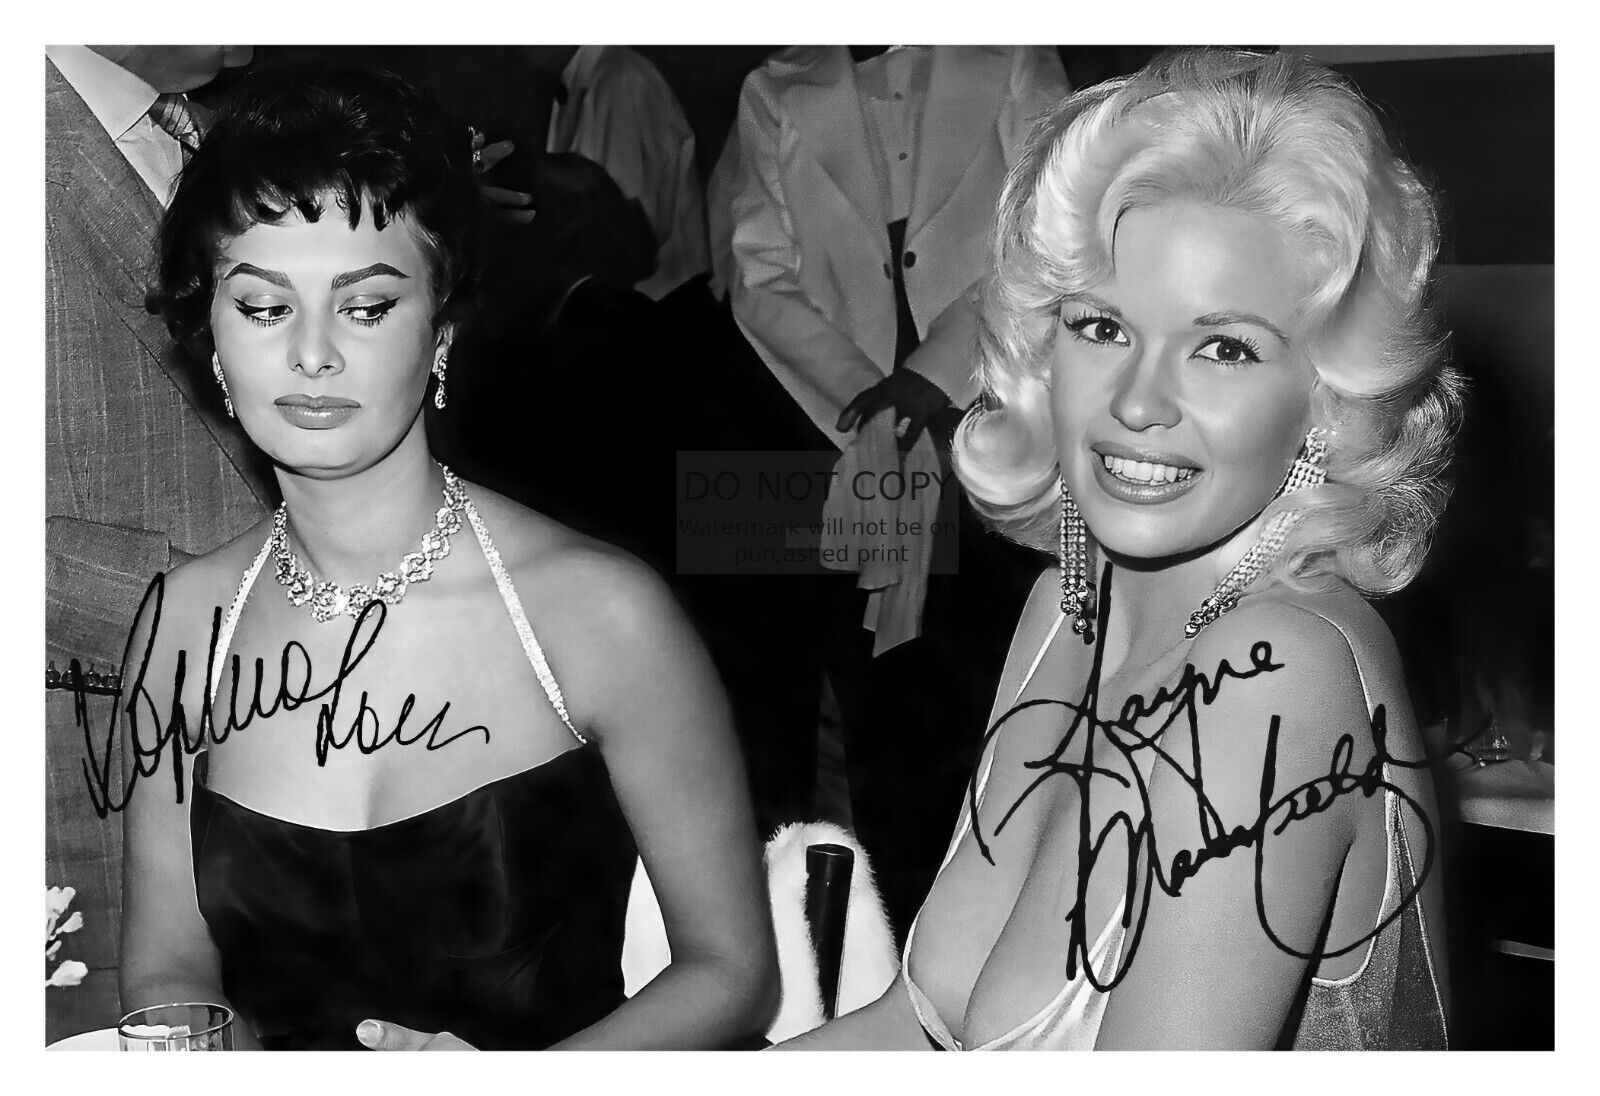 SOPHIA LOREN AND JAYNE MANSFIELD AT PARTY COMICAL AUTOGRAPHED 4X6 PHOTO